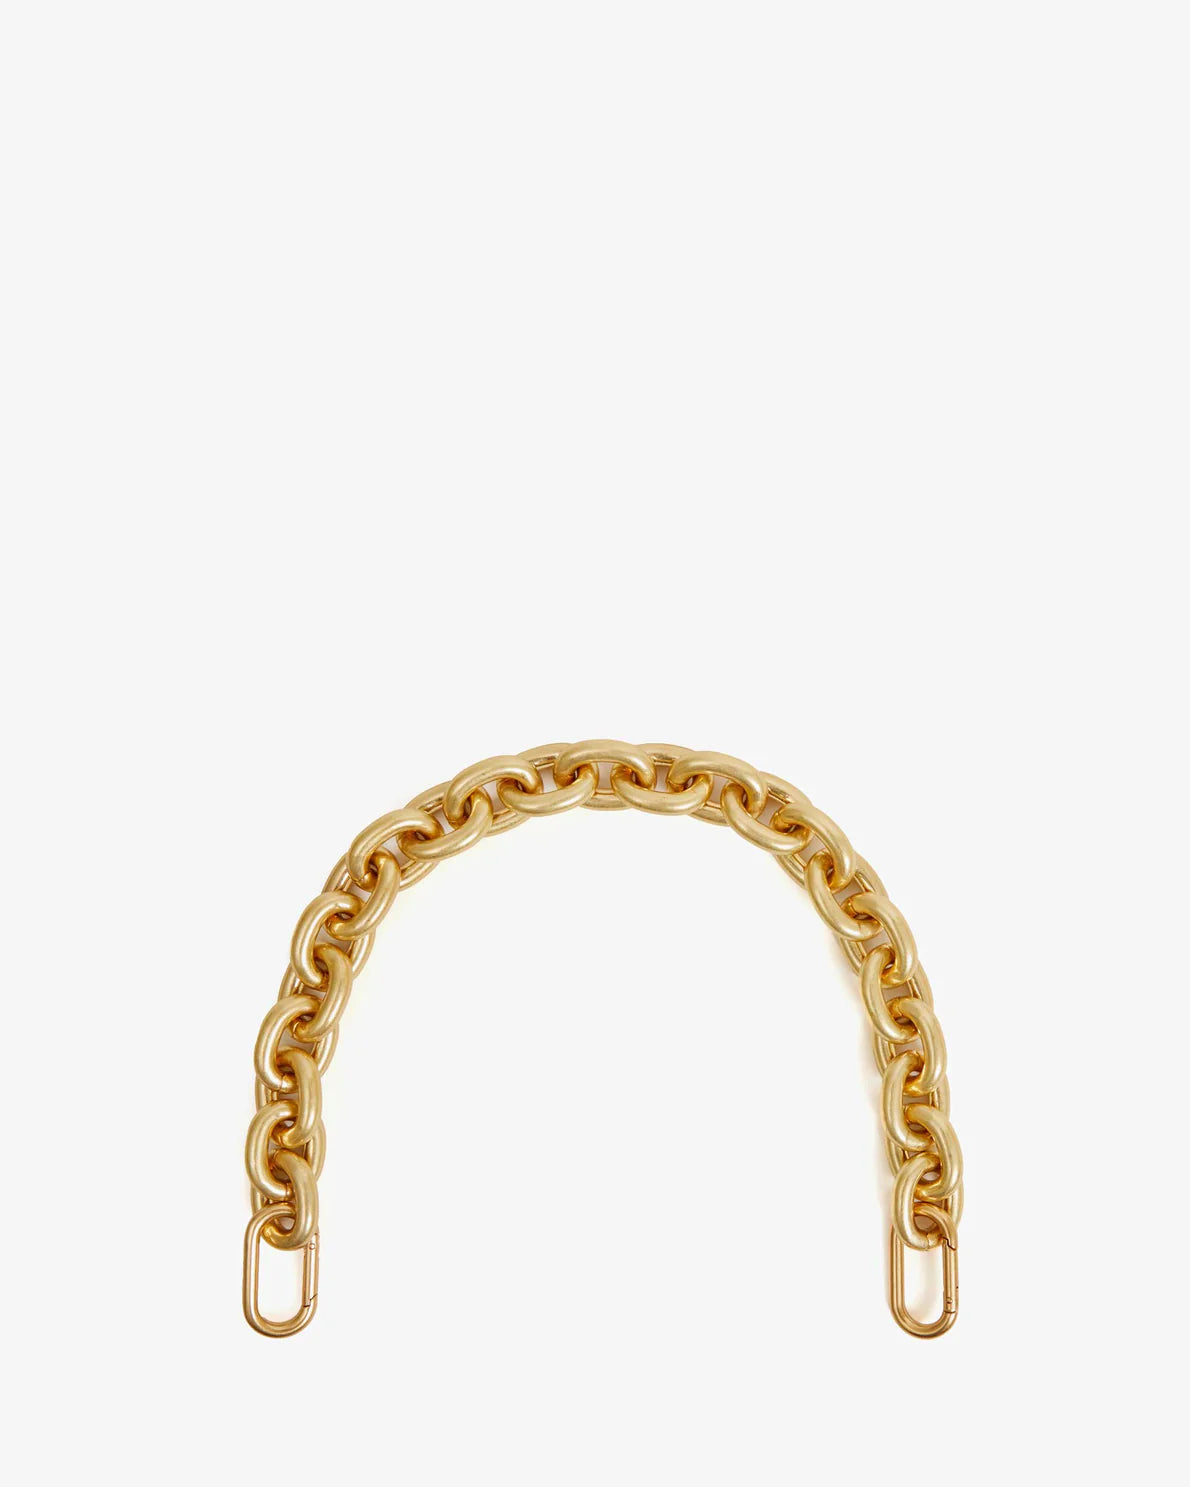 A single, gold-toned chain forming a semi-circle against a white background. The ends of the 17" long Clare Vivier Shortie Strap have brass spring links, distinct from the smaller, interlocking circular links that make up the remainder of the chain.